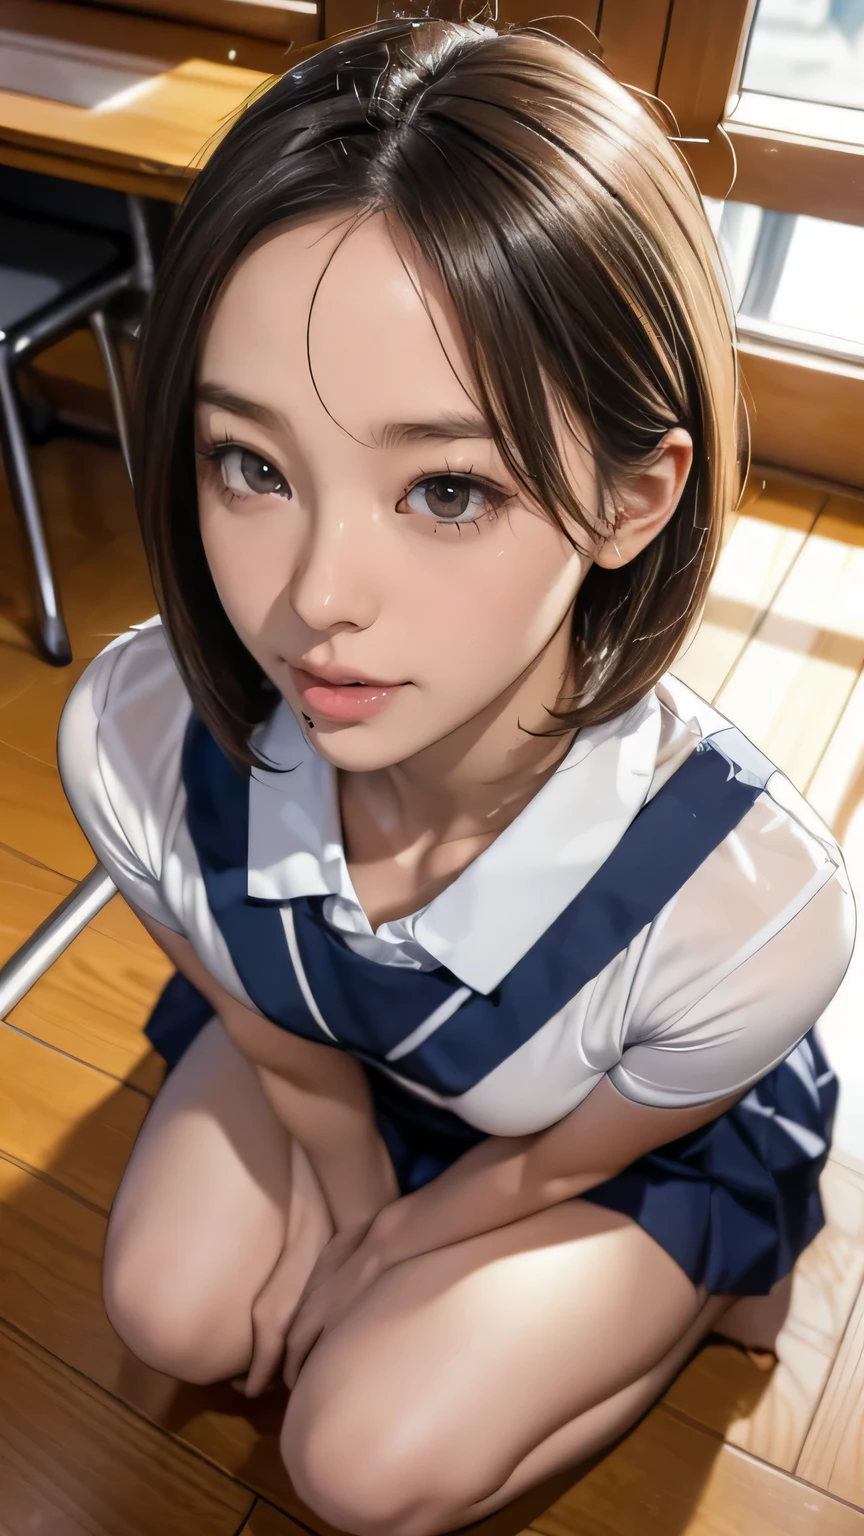 (Flying debris:1.2),(8K High Resolution), (highest quality), (RAW Image Quality), (reality), (that&#39;Realistic:1.37), Big eye,Long eyelashes,that&#39;Exquisite（Live-action Realistic style）,The ultimate face,Realistic光と影,Distinct facial features,Milky skin, Skin with attention to detail,Realistic skin details,Visible pores,（Very detailed）,(short hair),best portrait,((Photo taken from a distance, from the front)), Only one girl, Cute type,fine and beautiful eye, Beautiful and detailed nose, Very detailedな肌) ,(Beautiful face with double eyelids), (realism: 1.4),Great details, Ultra-high resolution,,,Delicate and beautiful face,,Age 25,(Beautiful Face 1.4),thin,,((School classroom)),, ((Wear a uniform&#39;Wearing a uniform and making eye contact with the audience)),Wear a uniform, Very beautiful legs,((Crouching in front of the viewer))),squat with your legs slightly open,The classroom floor is white,Crouching in front of the viewer,((Crouching in front of the viewer)), ((15-year-old girl, slim, Thin waist, Thin thighs, thin arms, smile)), (((Look up, (View from above:1.2), Semen On , Penis Facial,  ((Sticking out tongue, Open your mouth)), close ~ eye))), (Wet Face, Wet Hair)